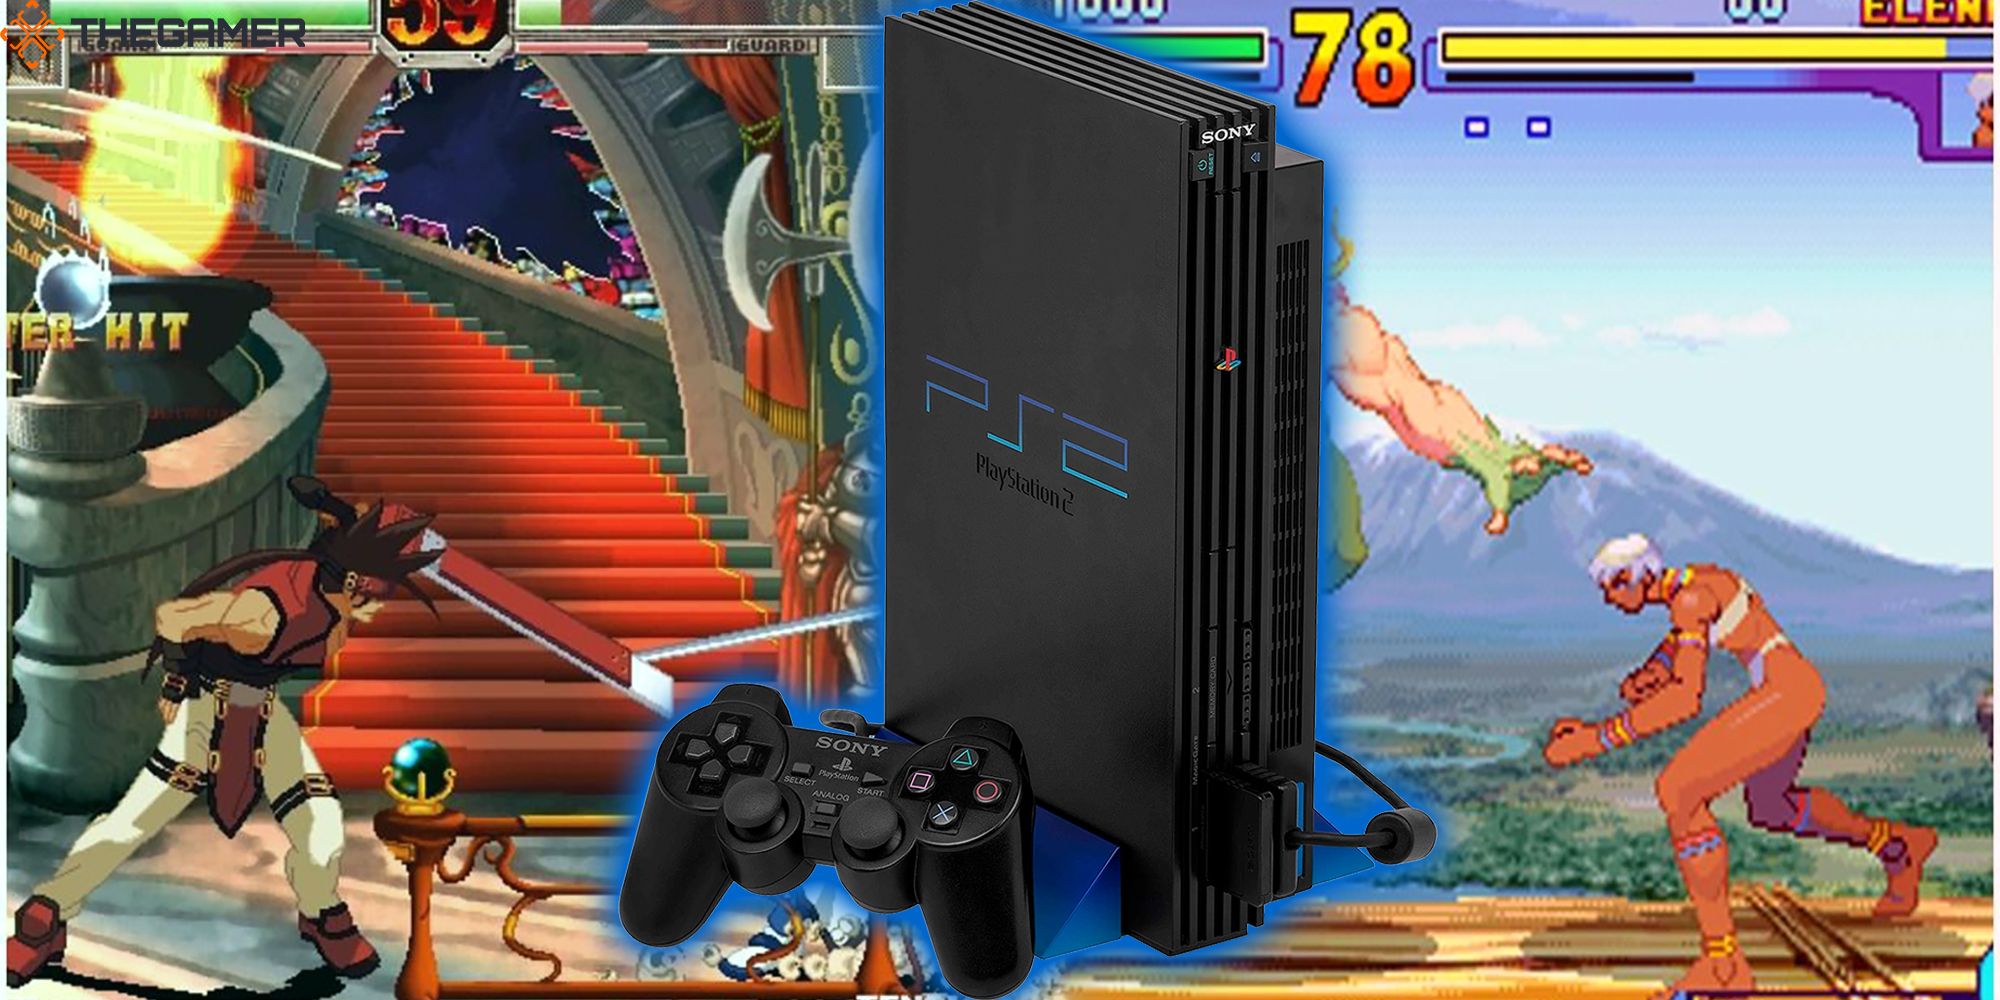 Background: screenshots of Sol Badguy, Ky Kiske, Alex, and Elena in Guilty Gear XX Accent Core and Street Fighter 3 Third Strike, respectively. Foreground: a blue glowing Playstation 2 console.